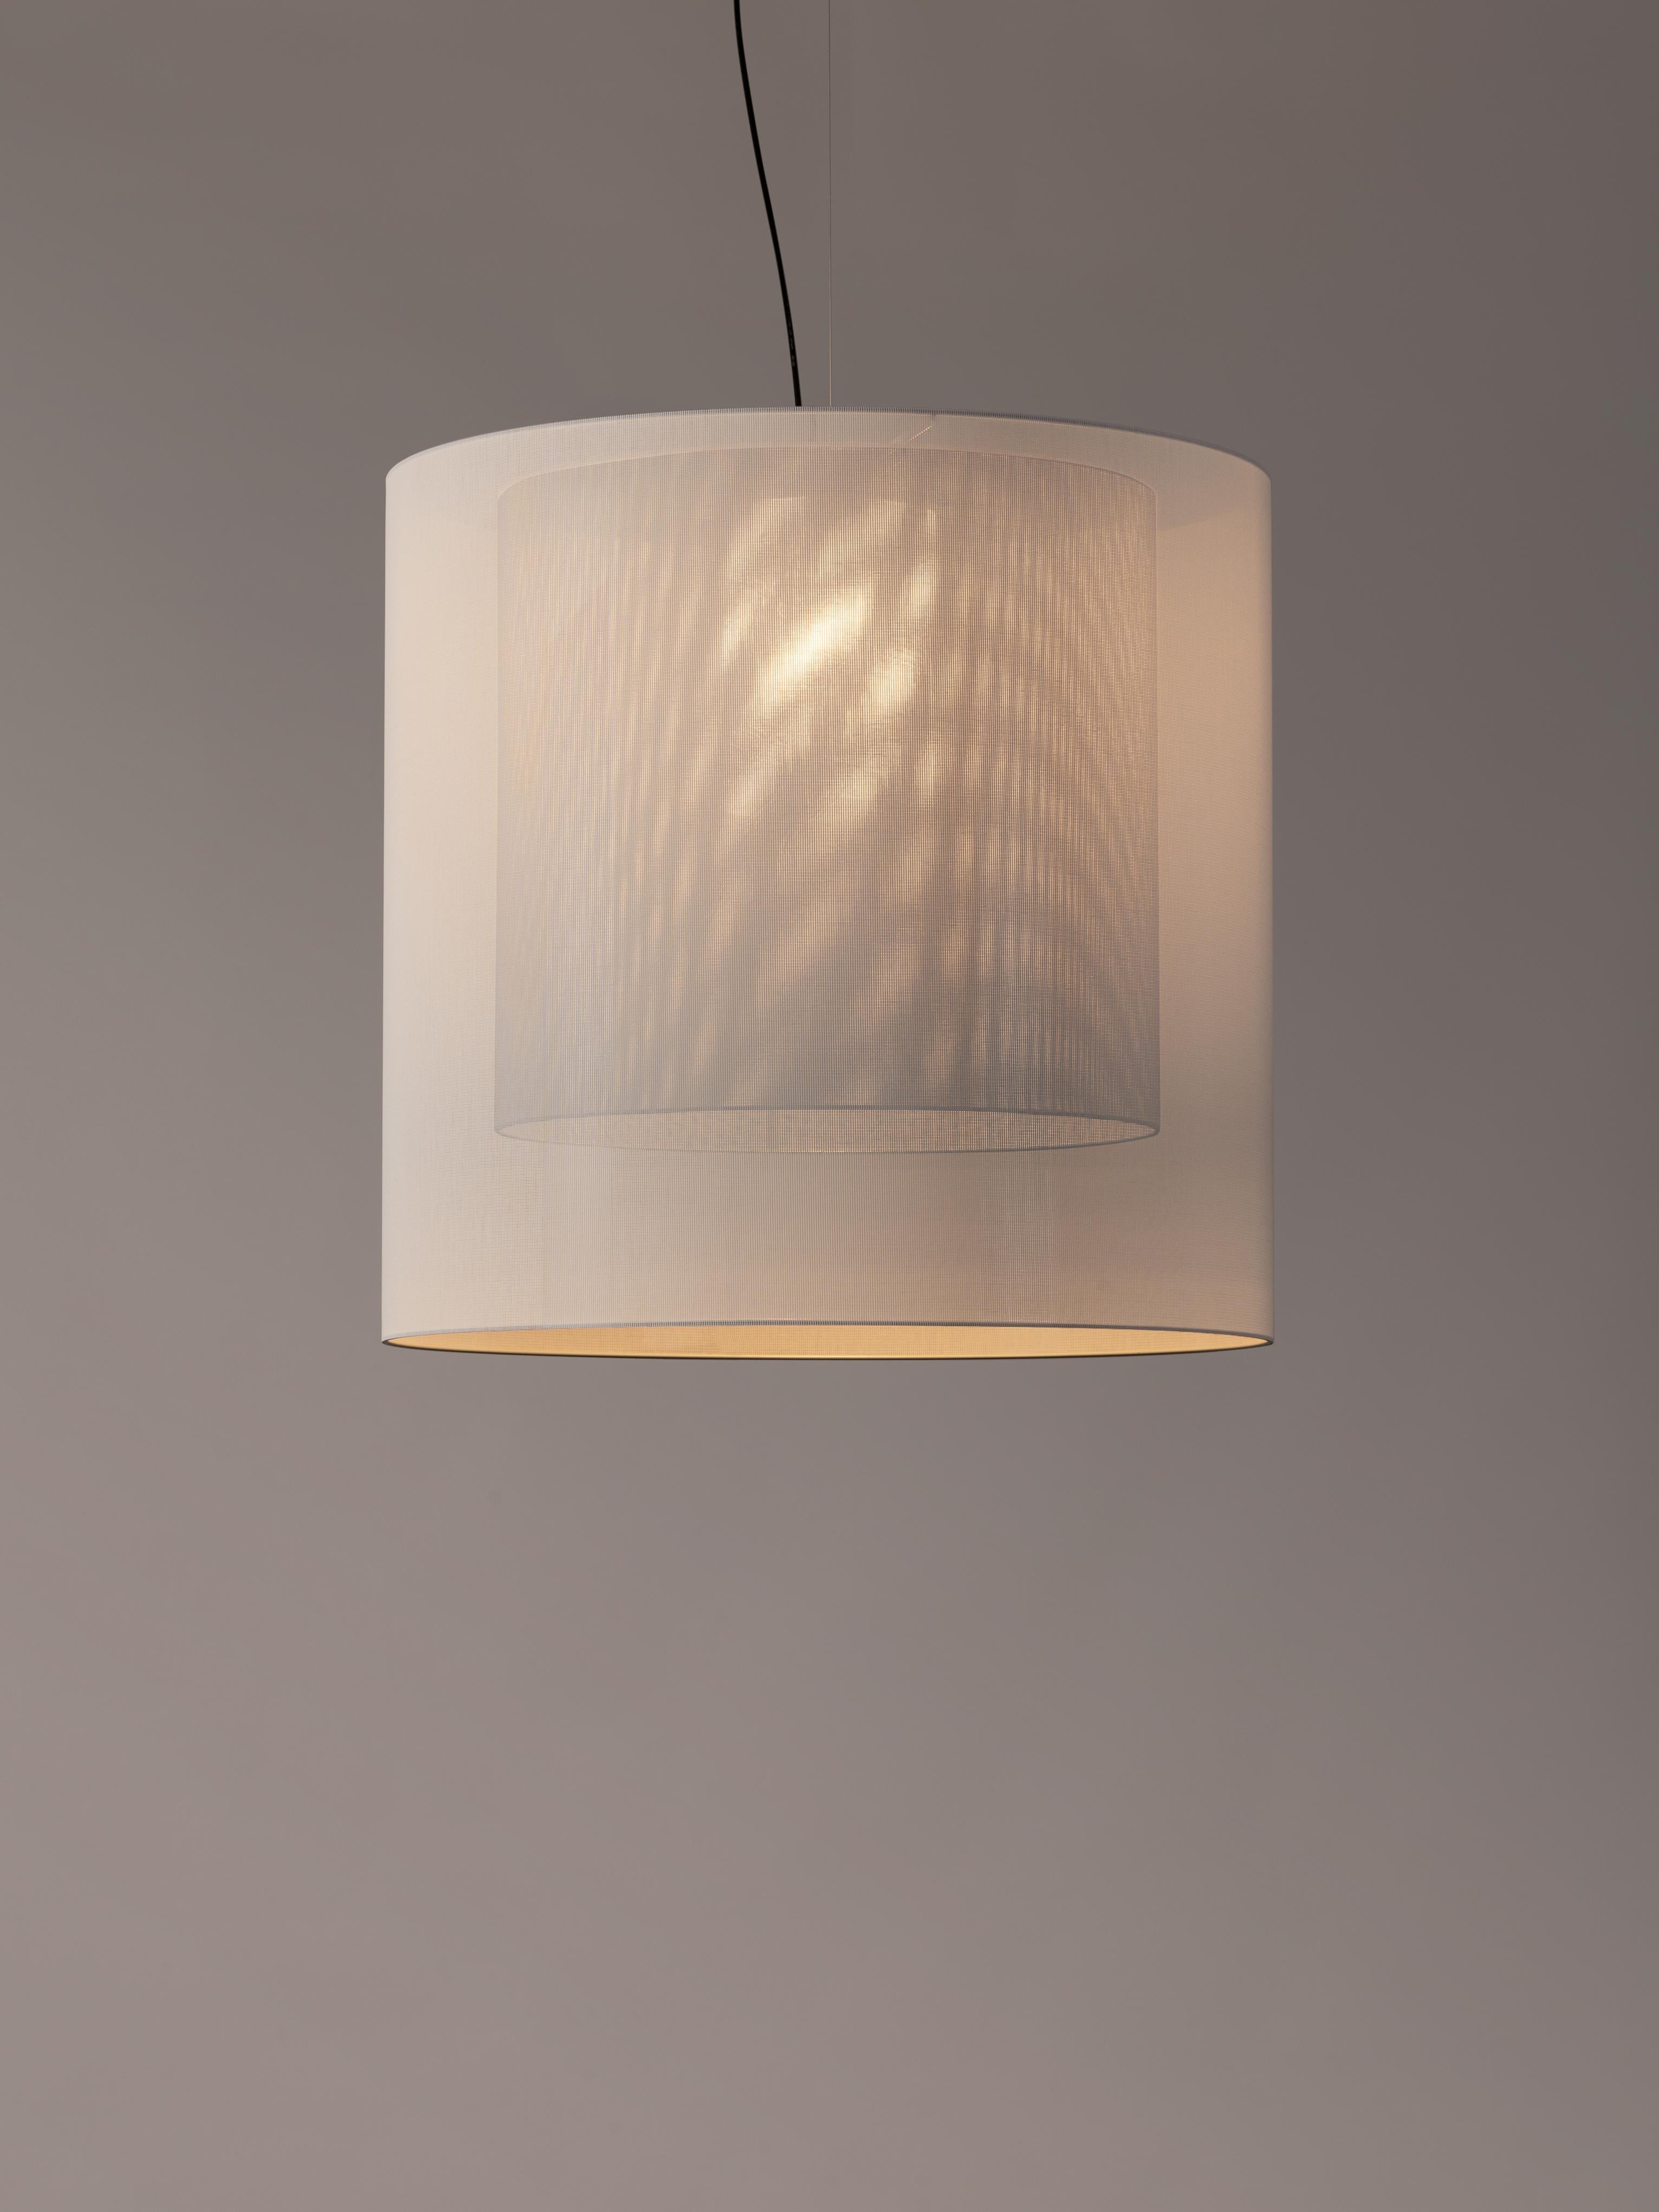 White and grey Moaré XL pendant lamp by Antoni Arola
Dimensions: D 83 x H 81 cm
Materials: Metal, polyester.
Available in other colors and sizes.

Moaré’s multiple combinations of formats and colours make it highly versatile. The series takes